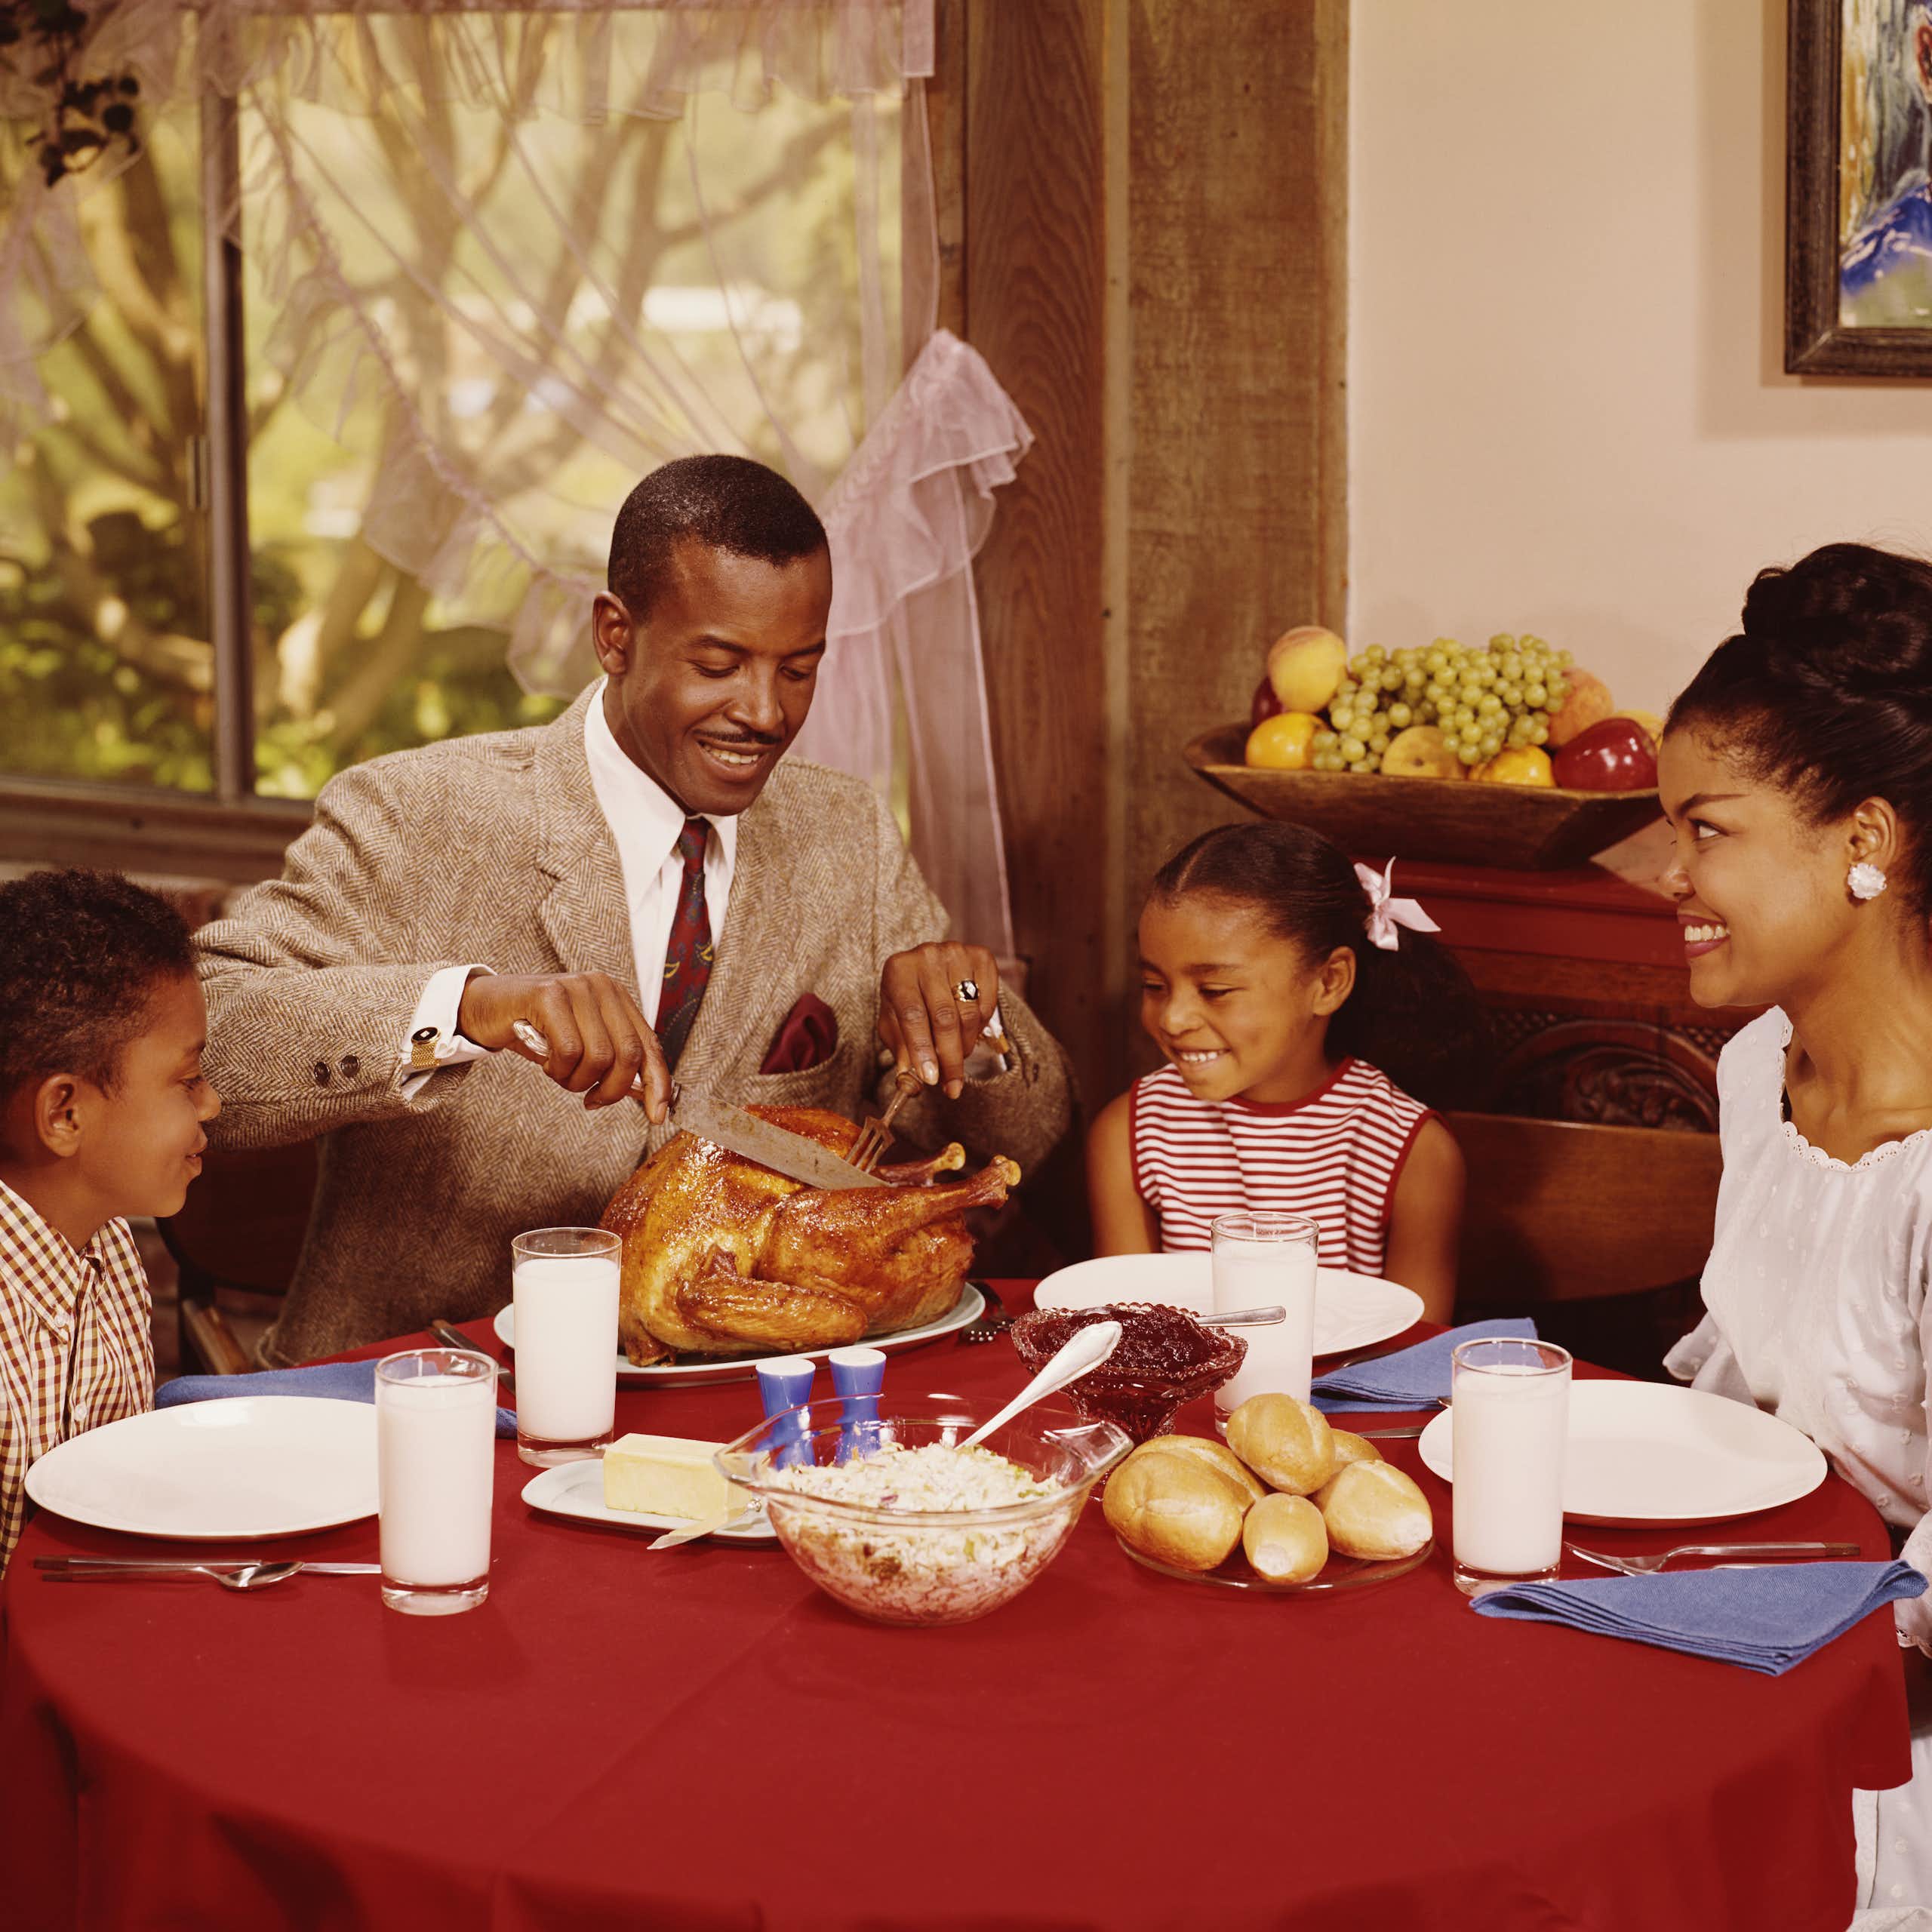 Vintage photograph of a Black family eating dinner – a father, mother and their two young kids. 